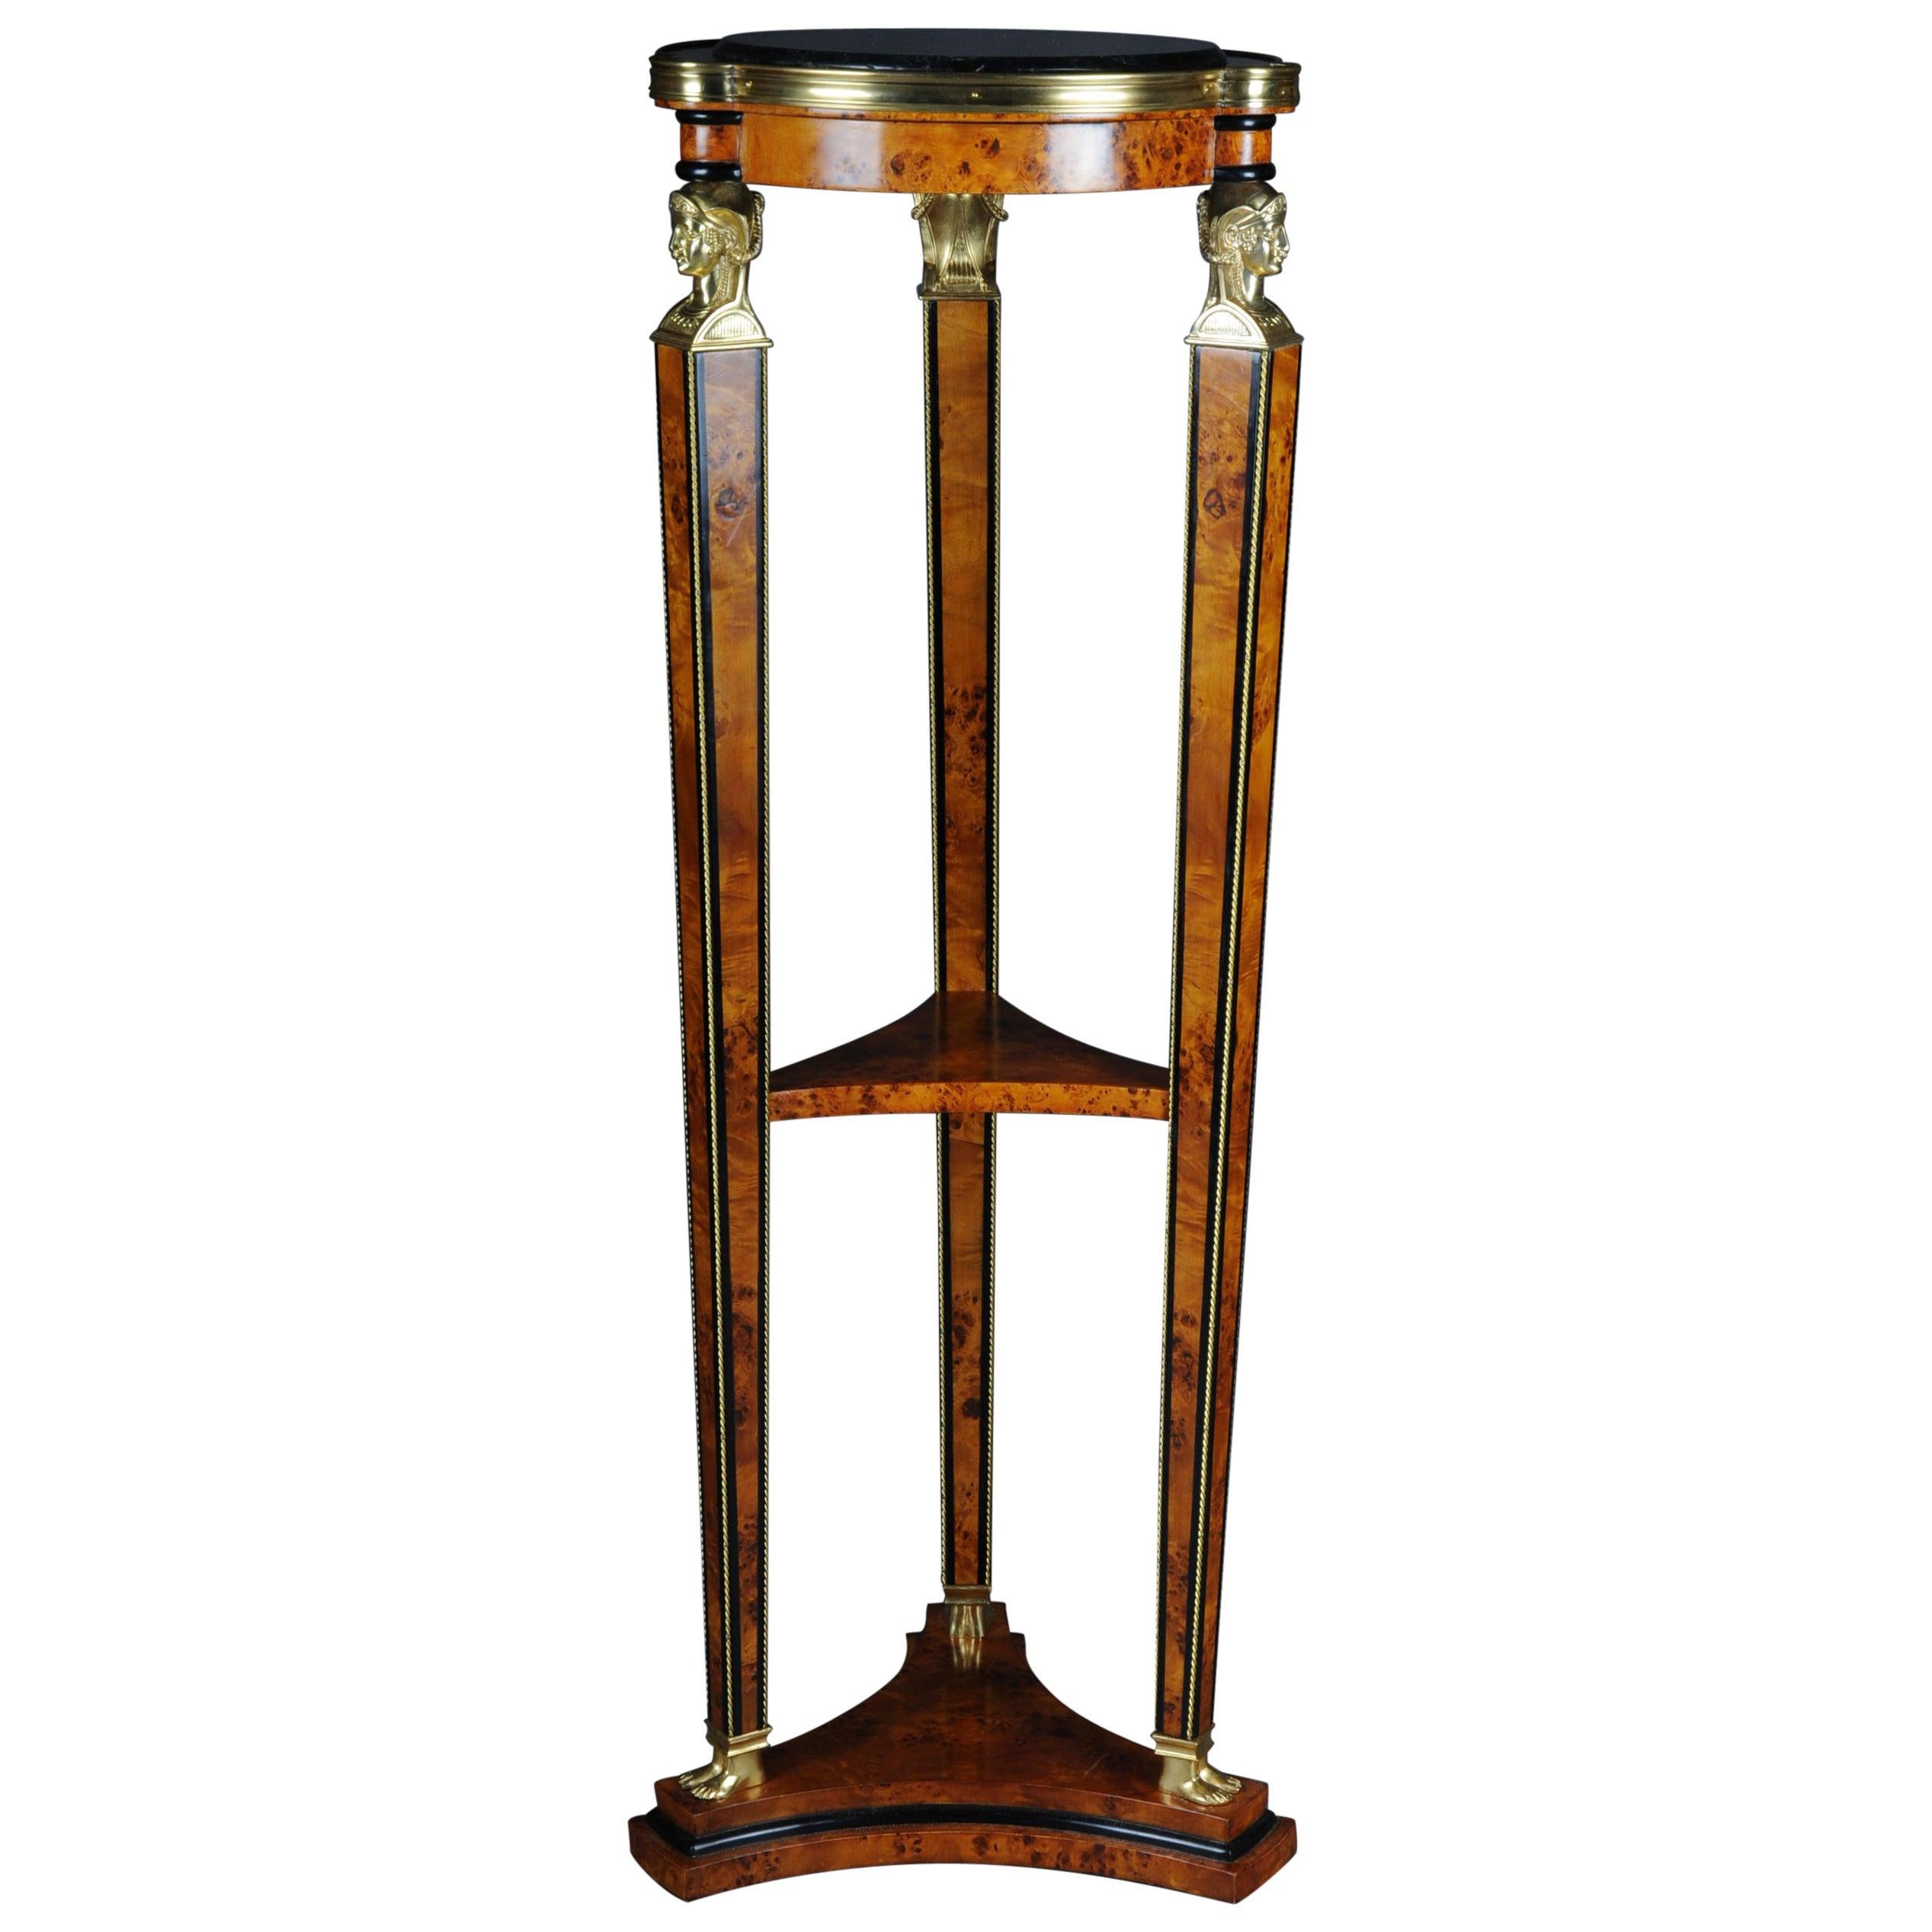 Large Classical Karyadite Side Table Column in the Empire Style